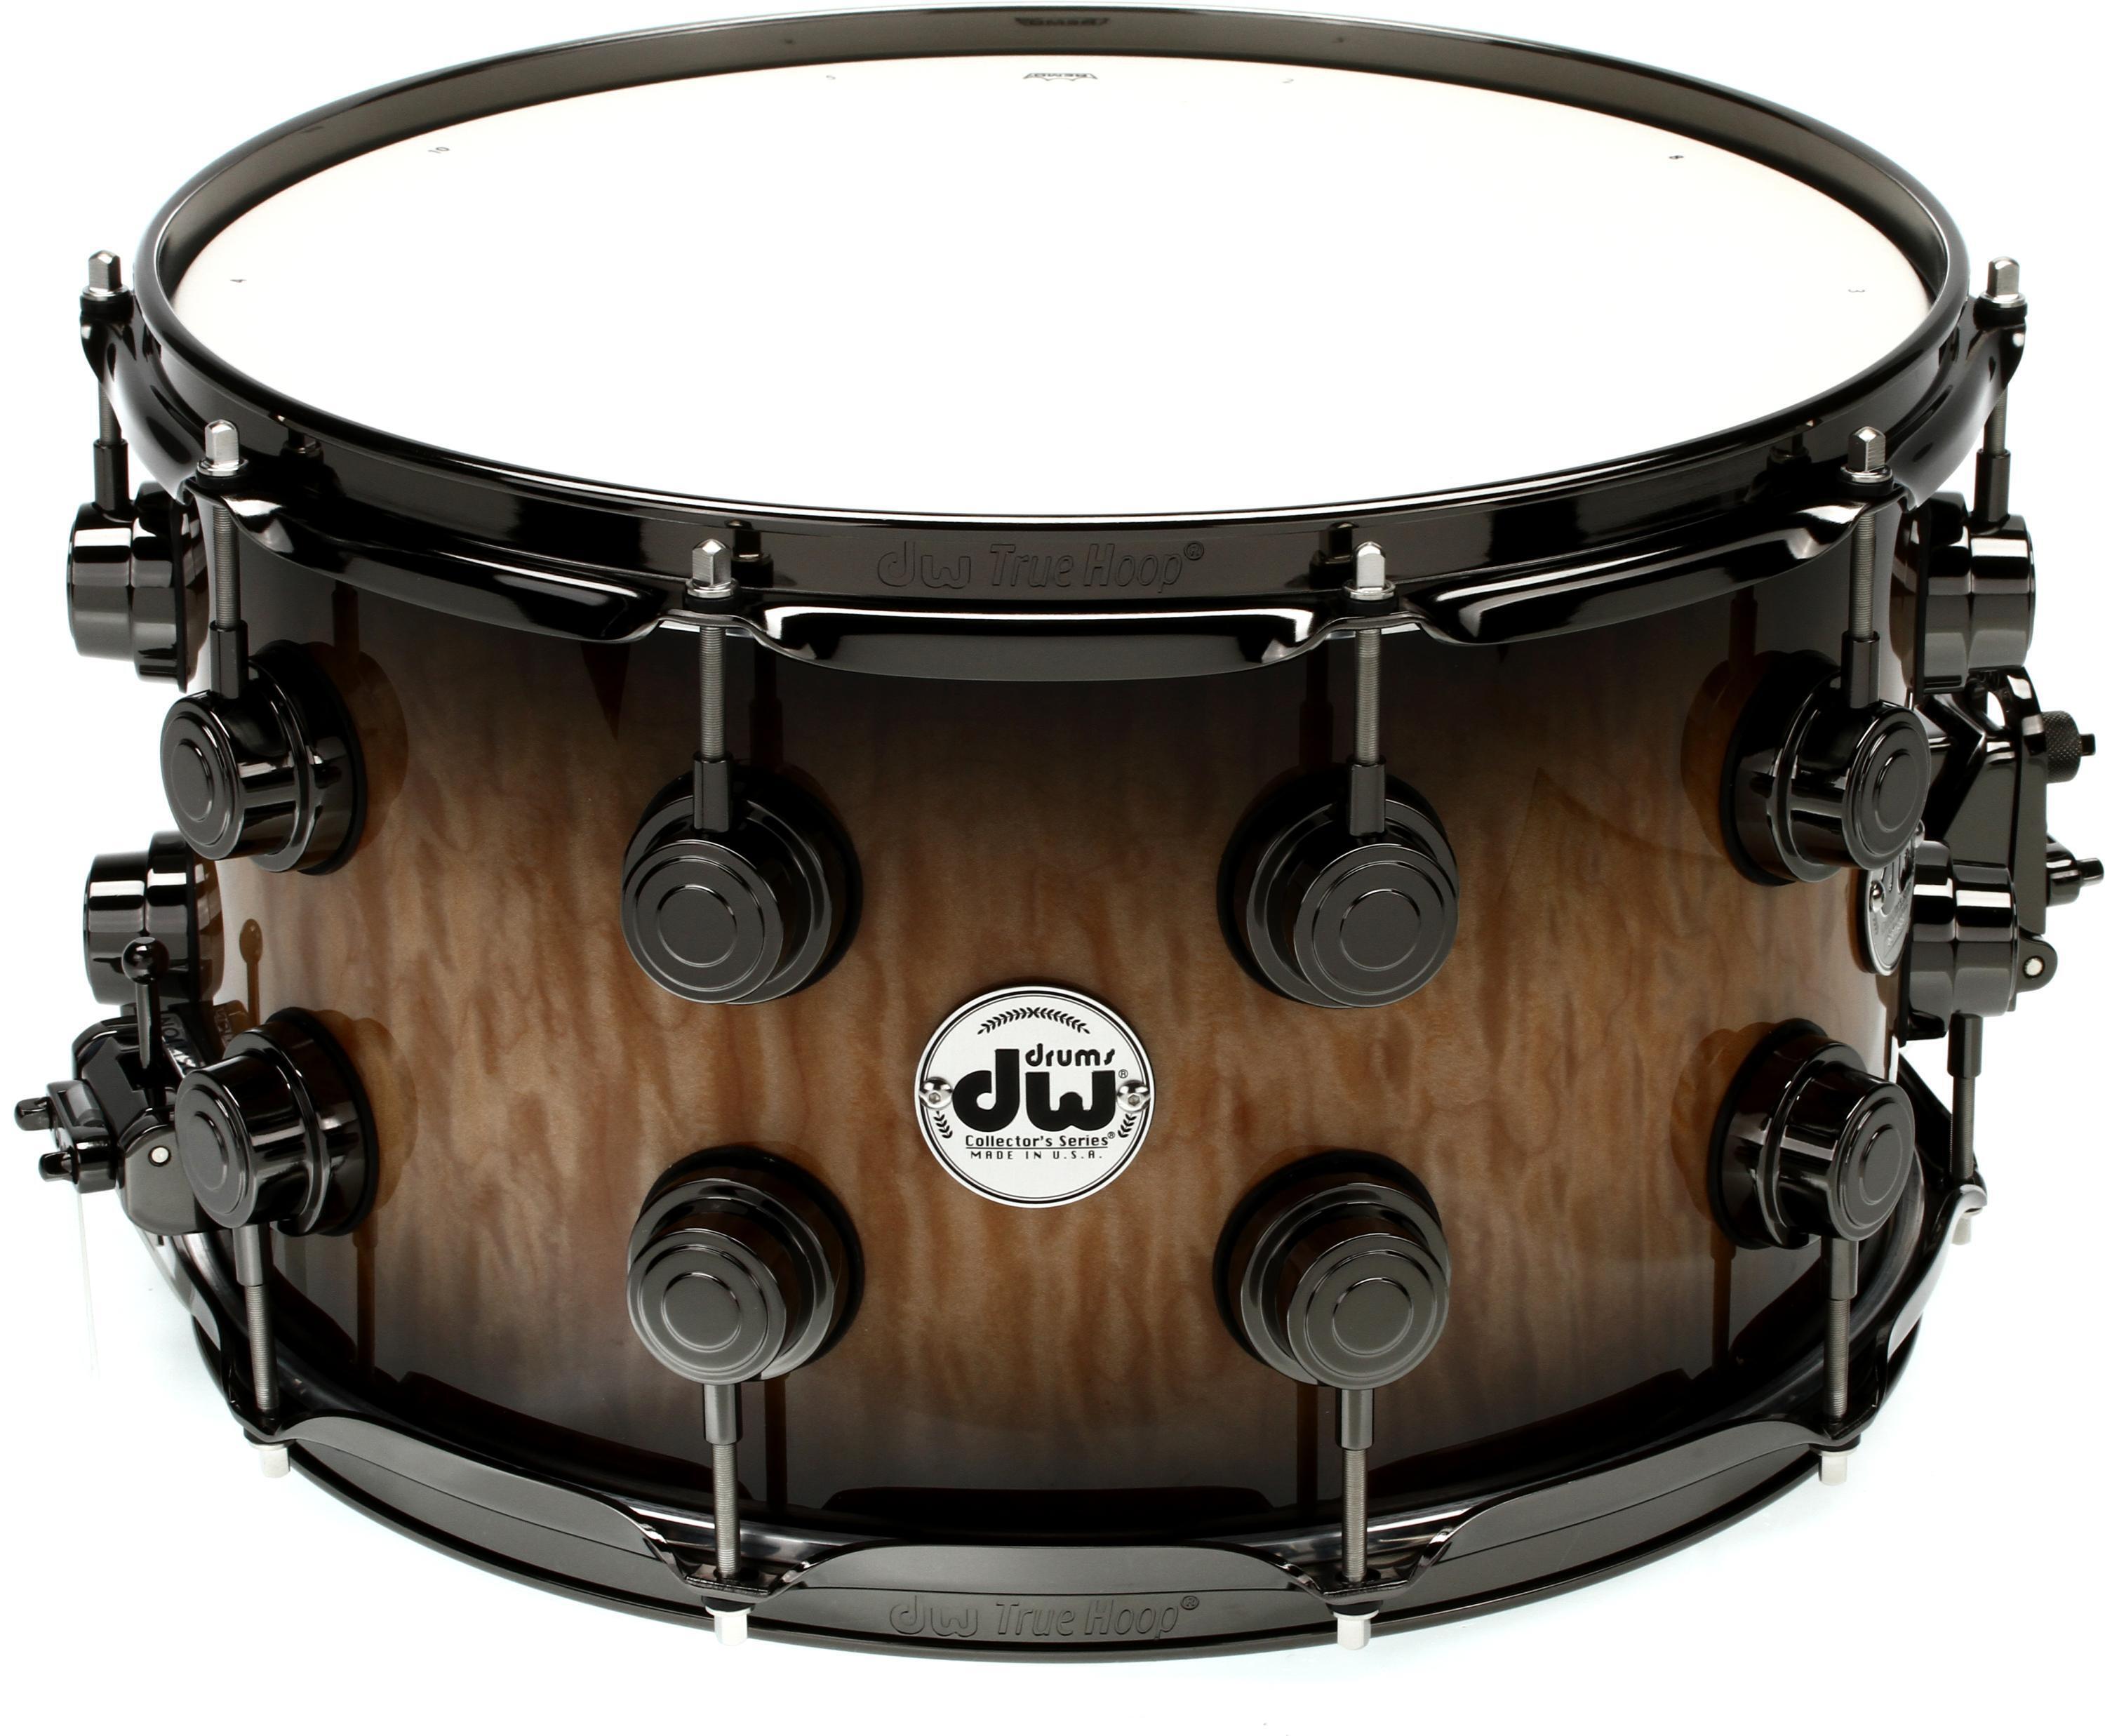 DW Collector's Series Exotic Snare Drum - 8 x 14 inch - Quick Candy Black  Burst over Quilted Maple